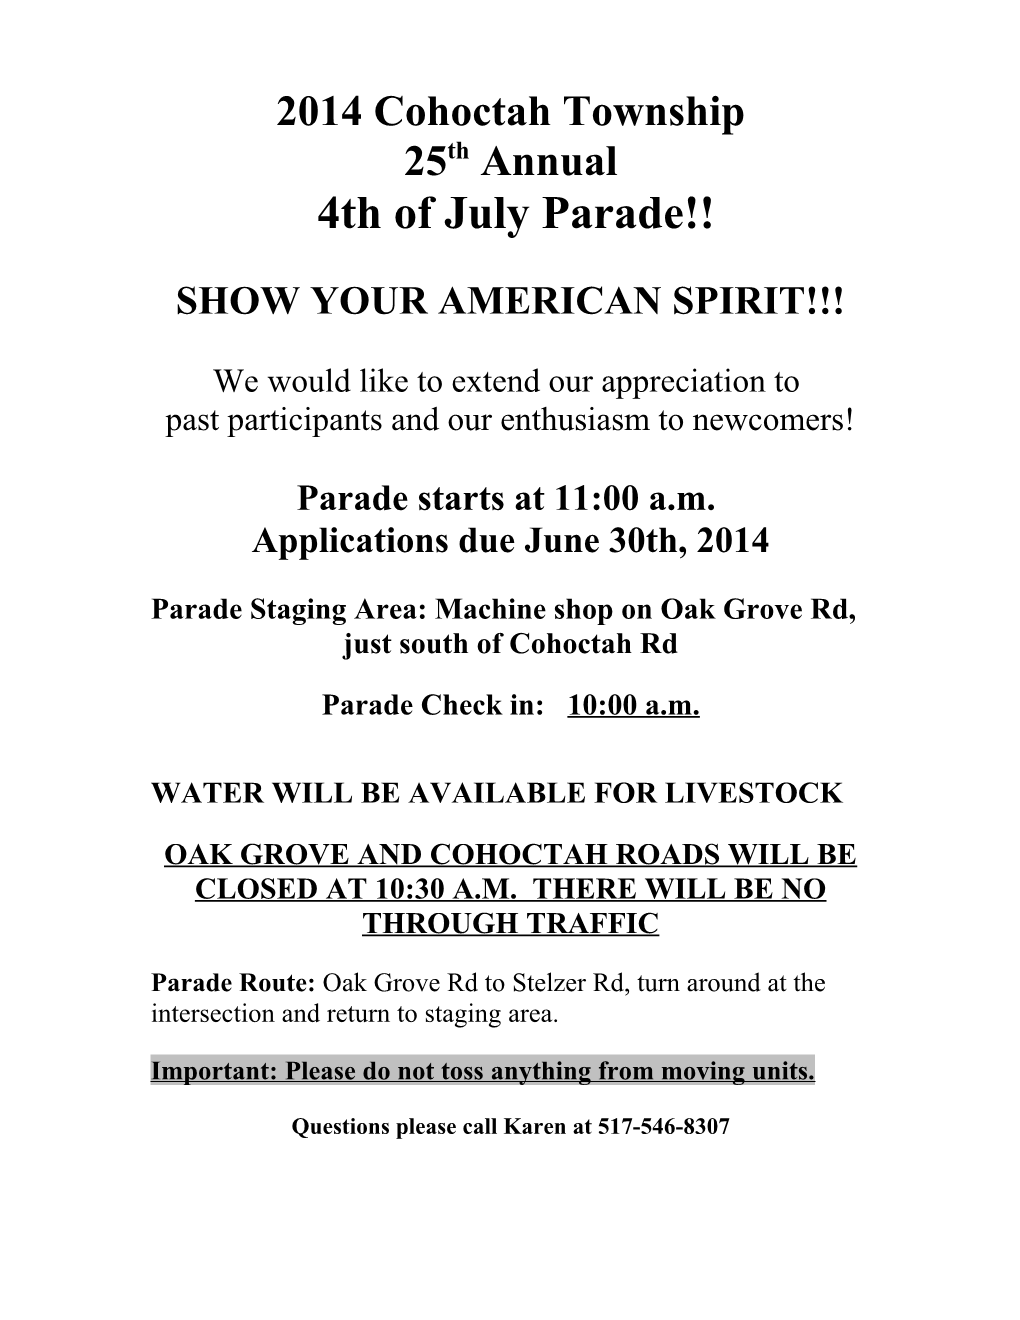 The 2006 Cohoctah Township 4Th of July Parade